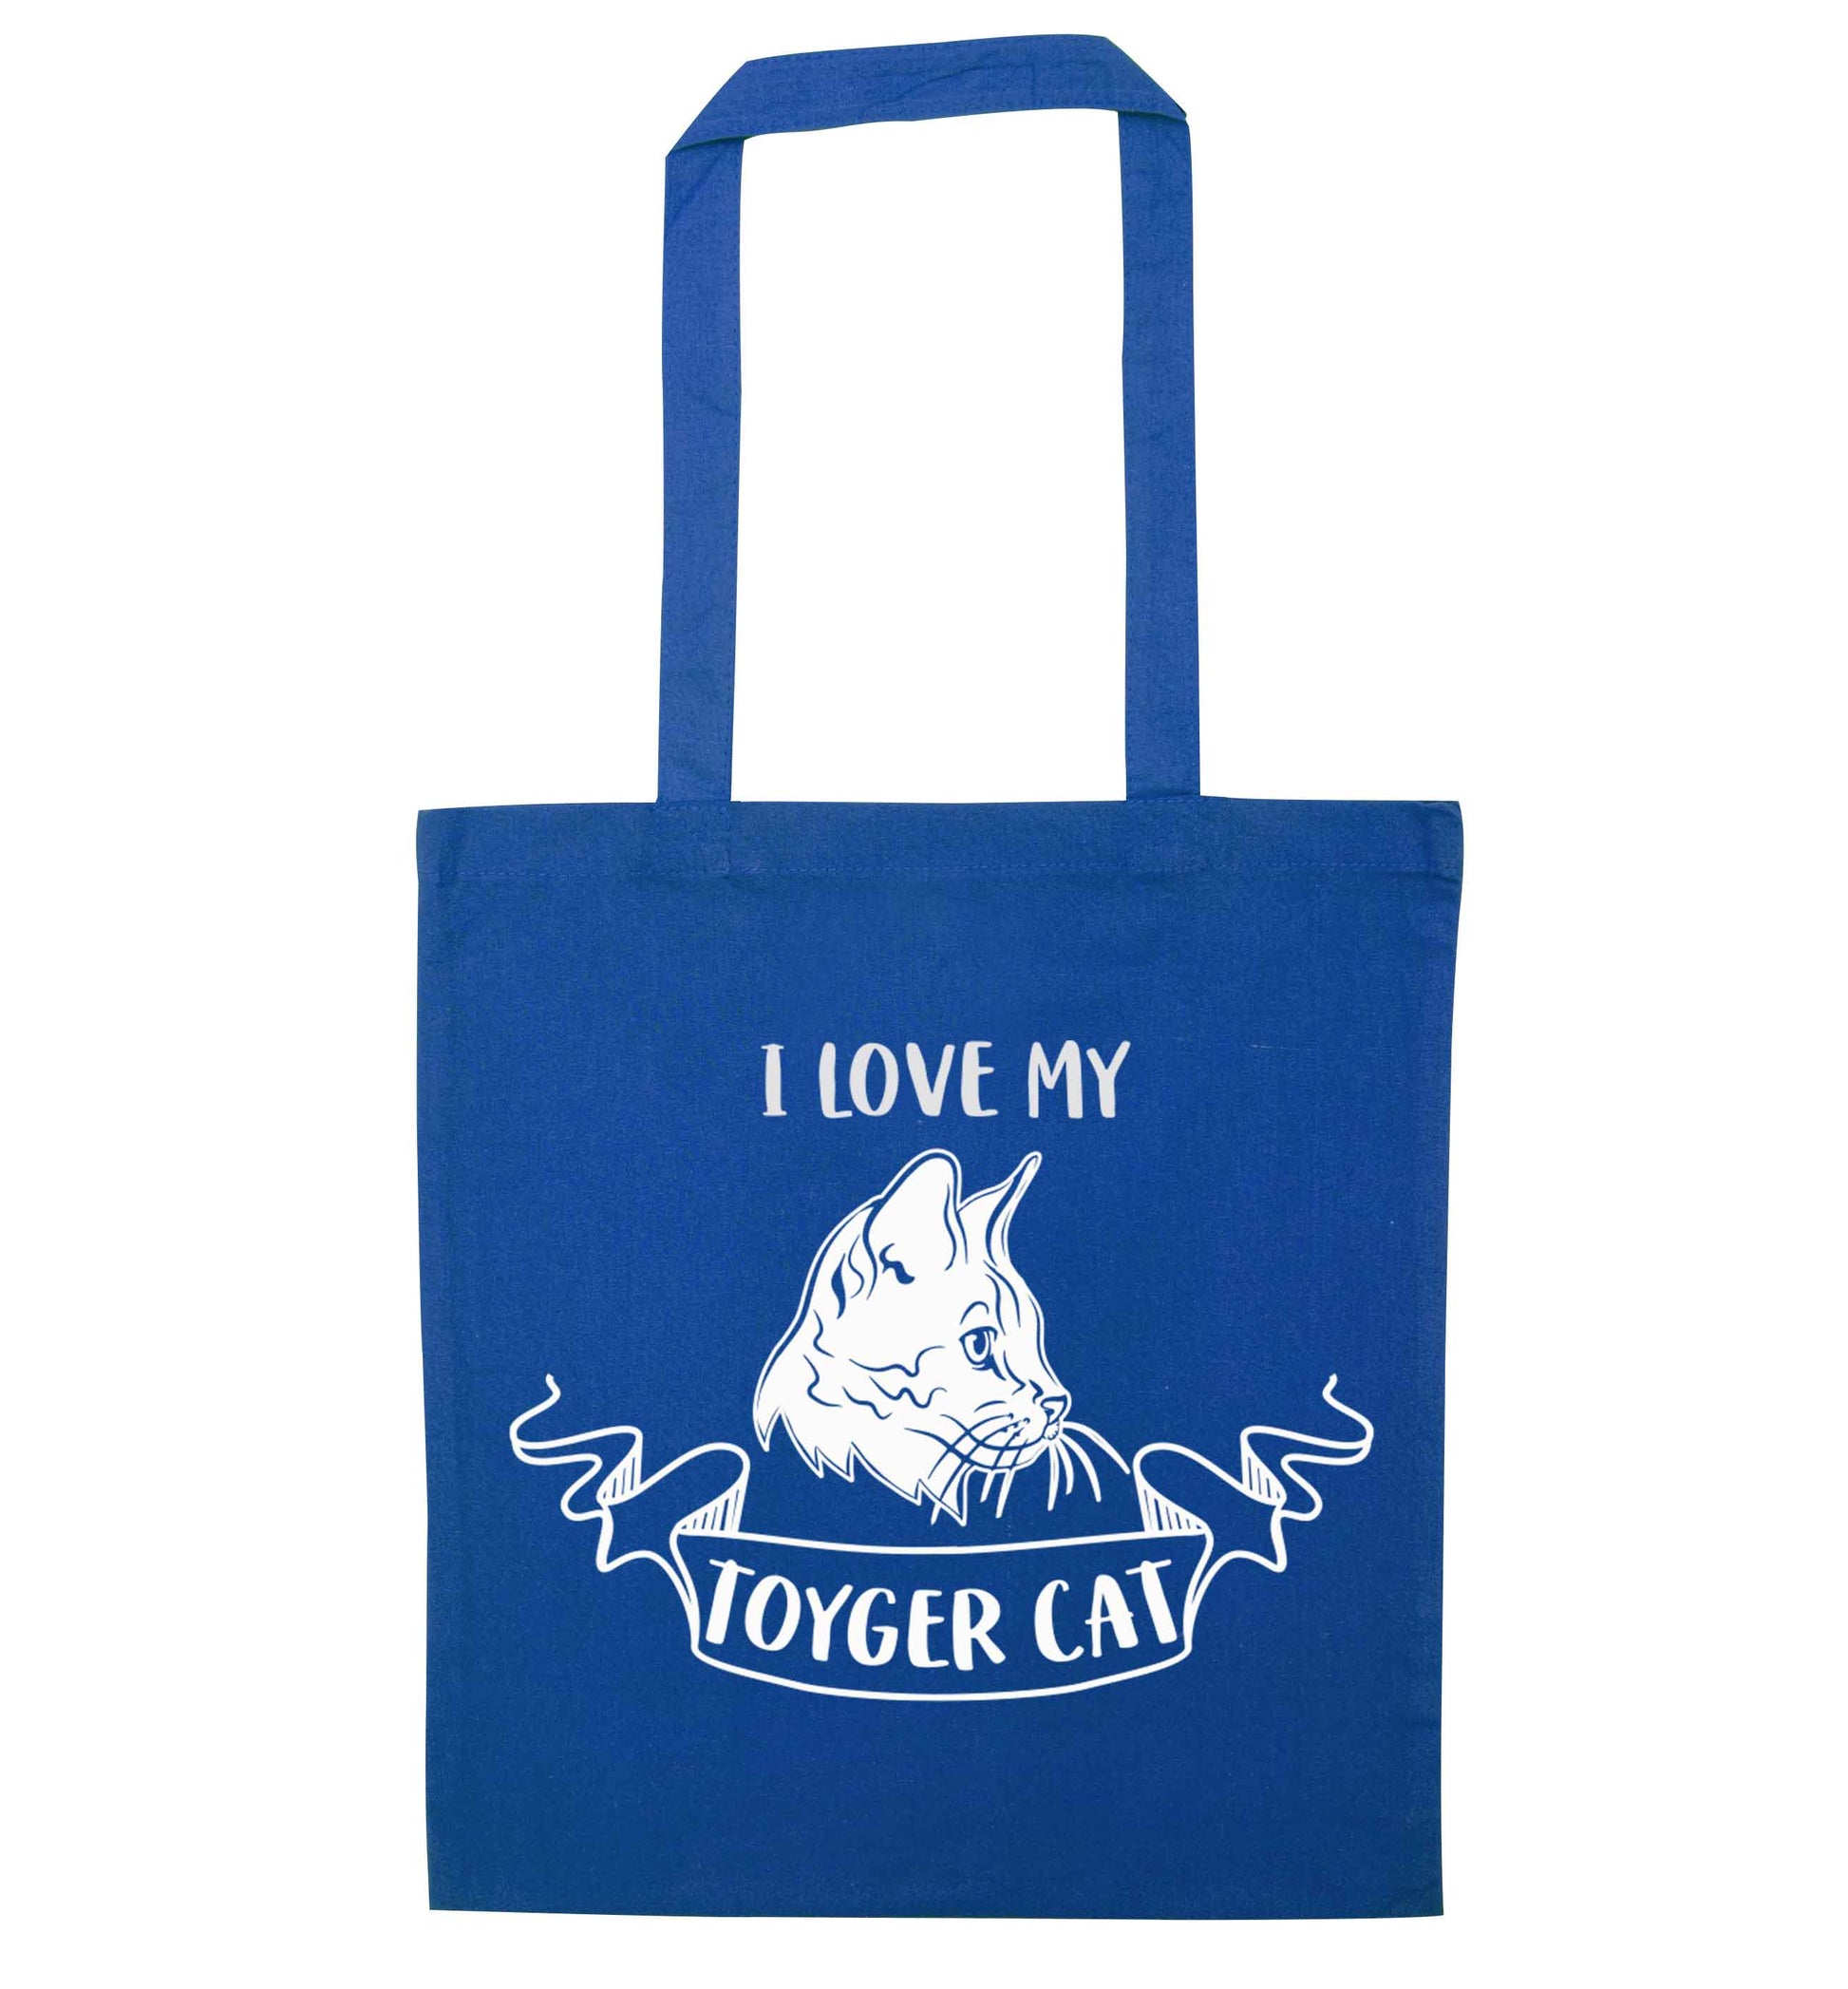 I love my toyger cat blue tote bag